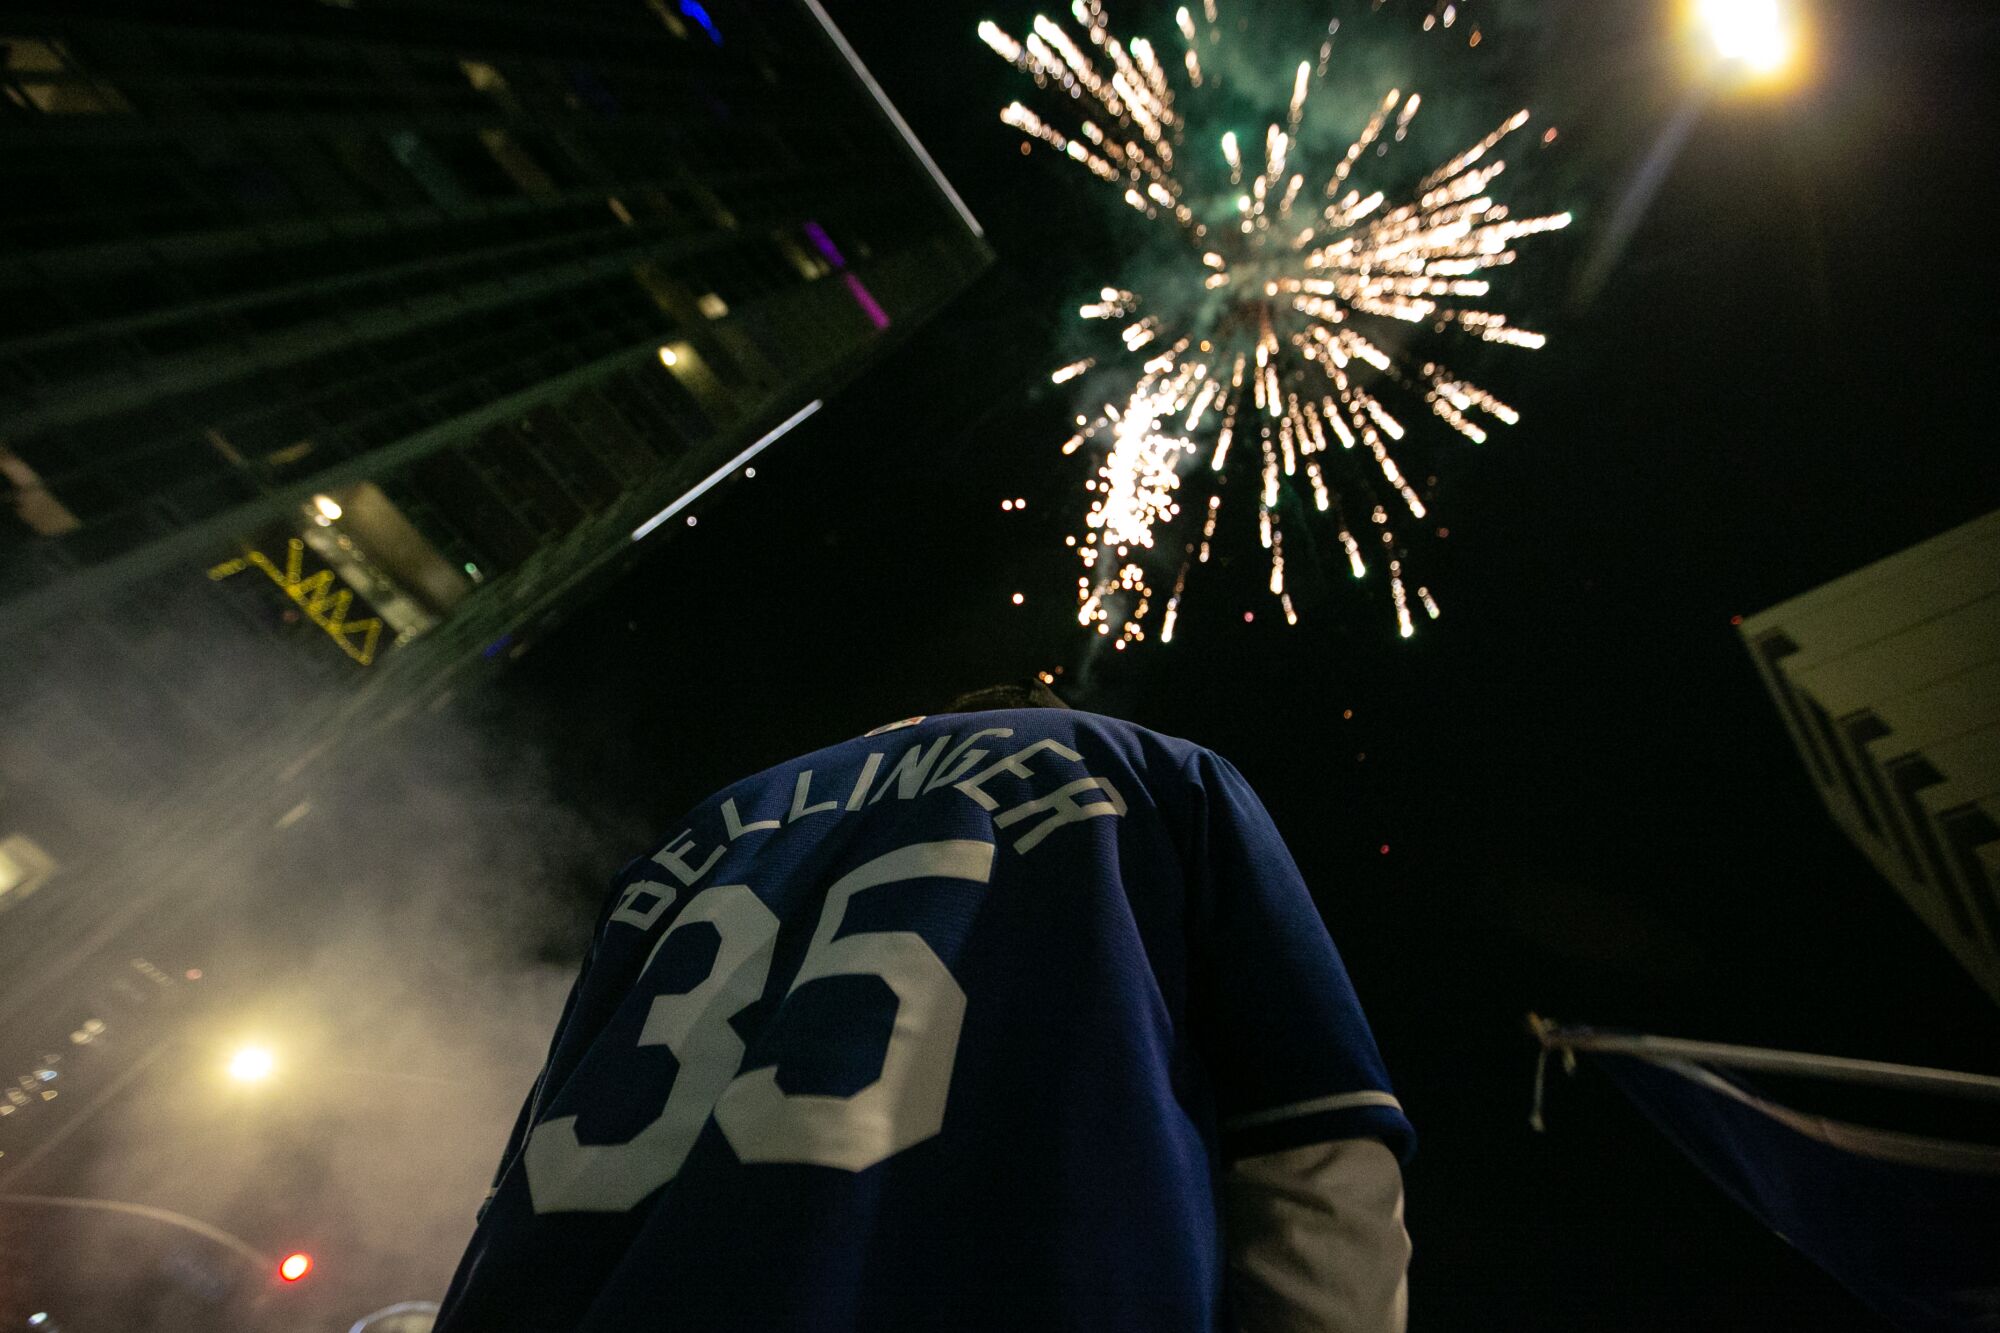 A person in a Cody Bellinger jersey is seen with fireworks exploding in the sky overhead.